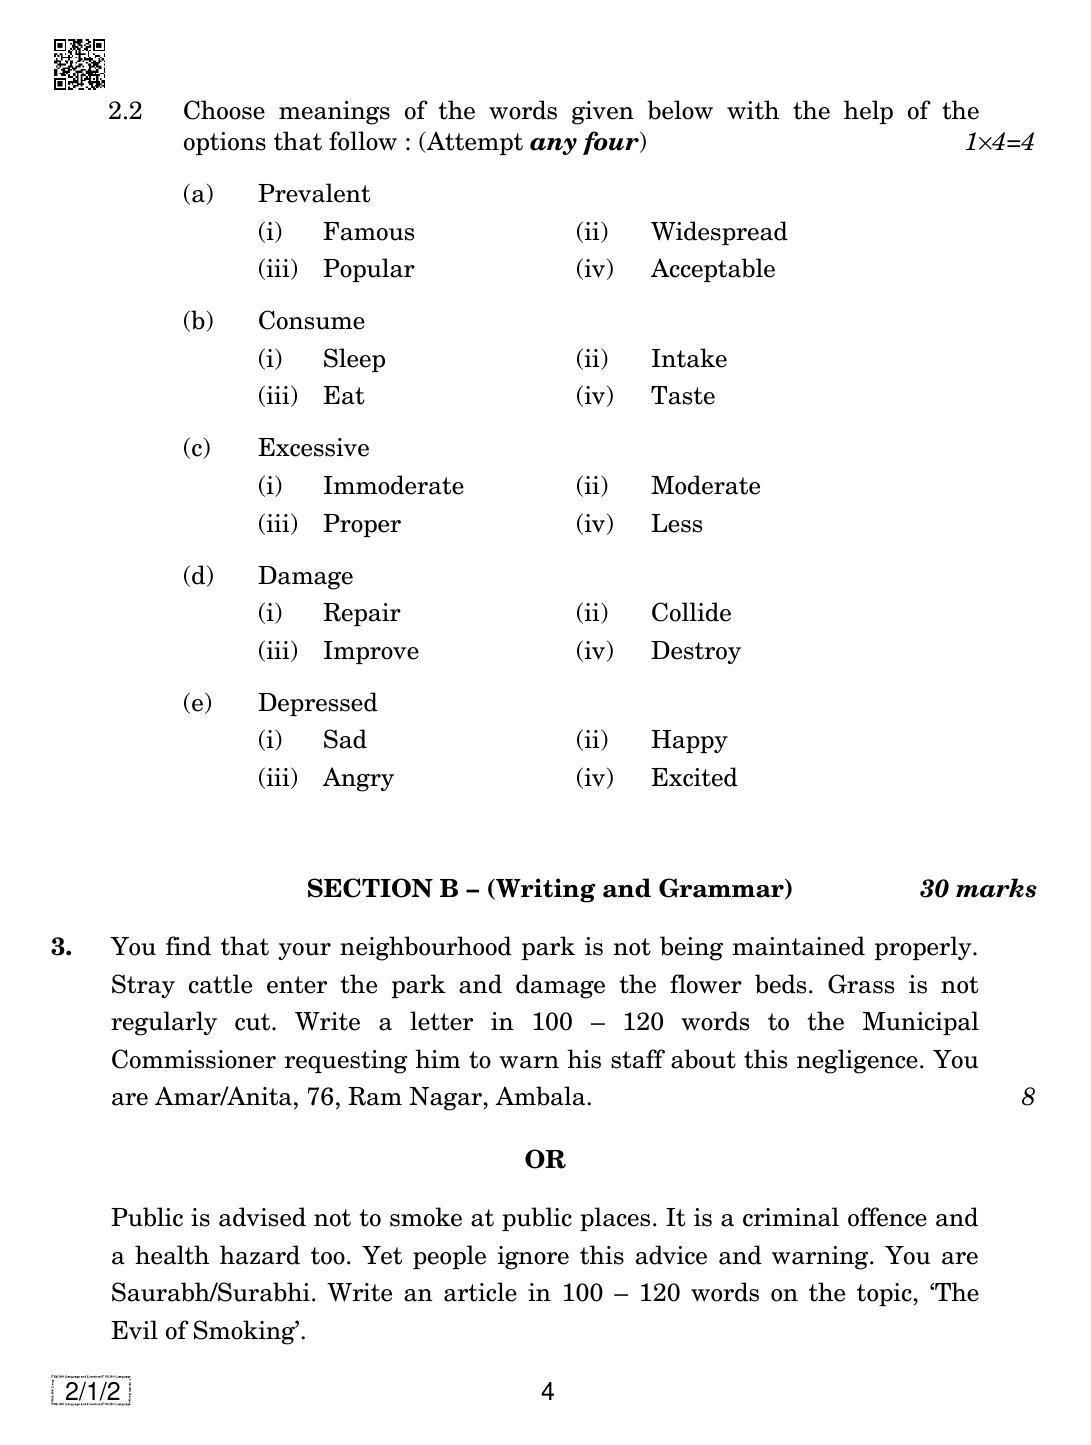 CBSE Class 10 2-1-2 ENGLISH LANG. & LIT. 2019 Compartment Question Paper - Page 4